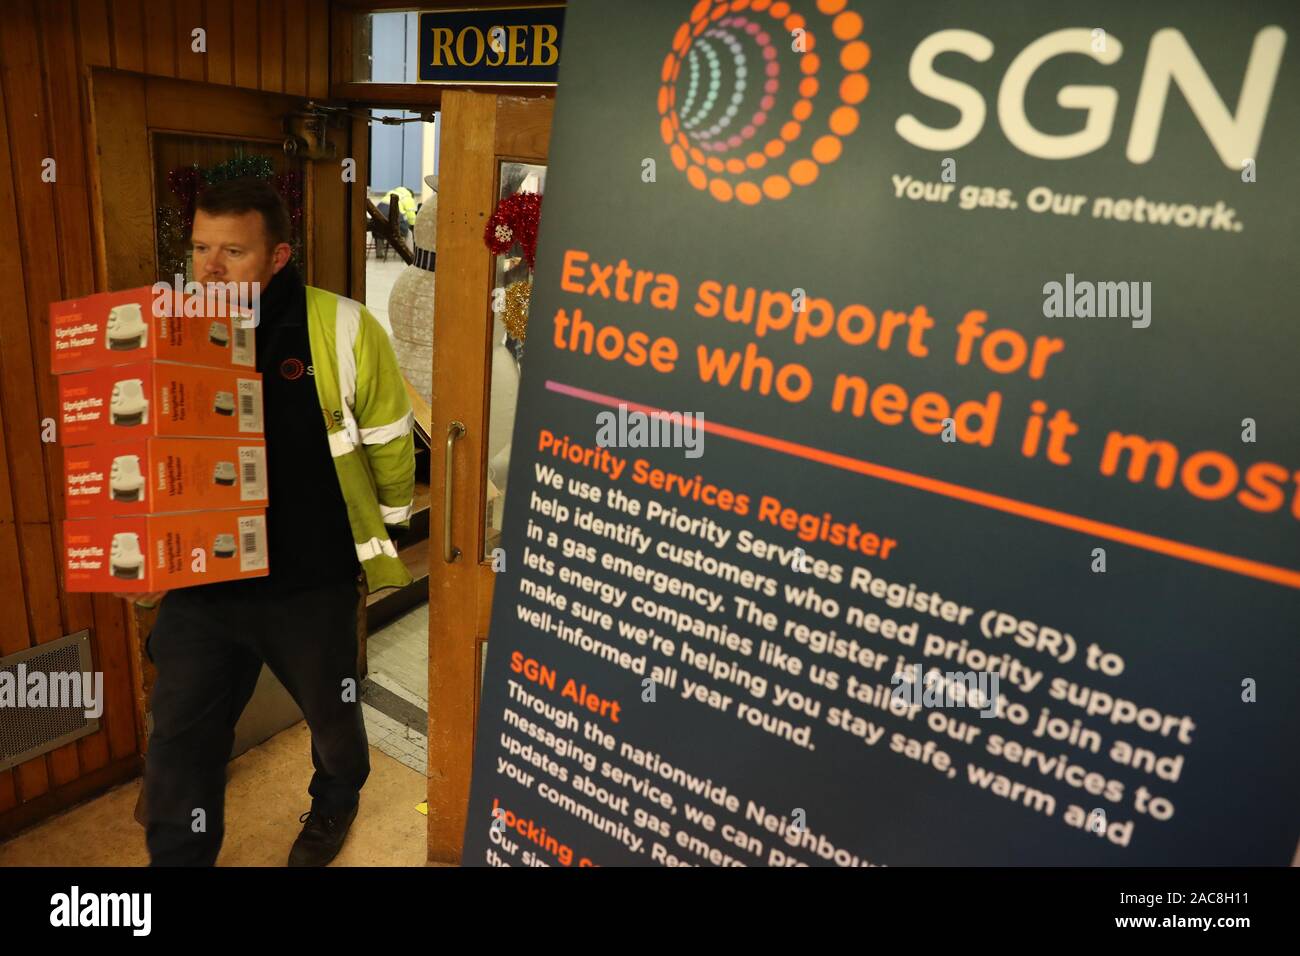 Heaters and hotplates are distributed at Camelon community centre, Falkirk, after a gas mains failure in central Scotland. Eight thousand properties are affected, with Gas infrastructure company SGN saying it will have to go door-to-door to turn off supplies in affected properties for safety reasons. Stock Photo